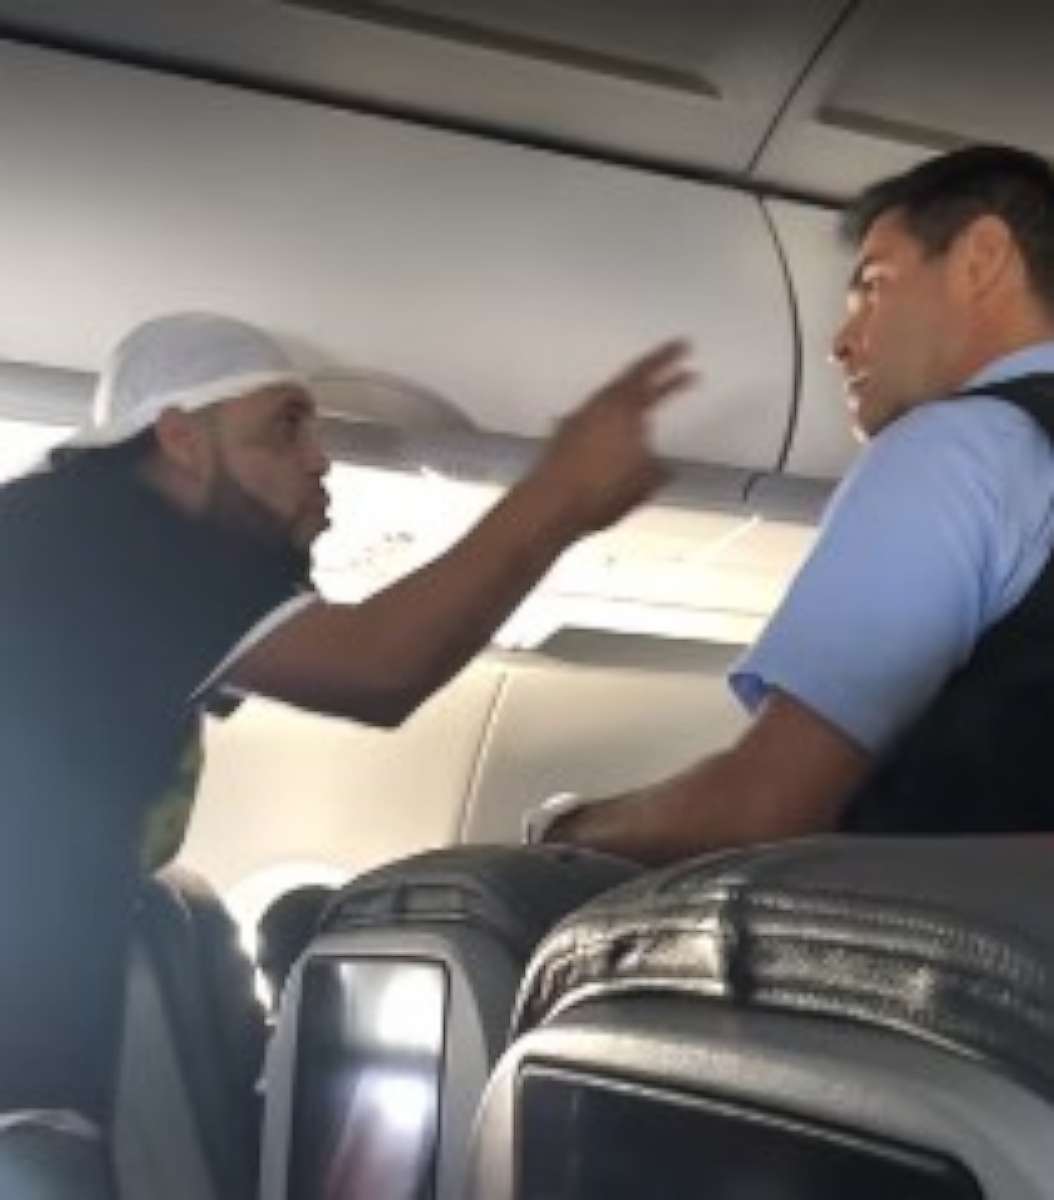 A passenger was dragged off a plane by police in Miami on Wednesday, May 23, 2018, after getting into a fight.